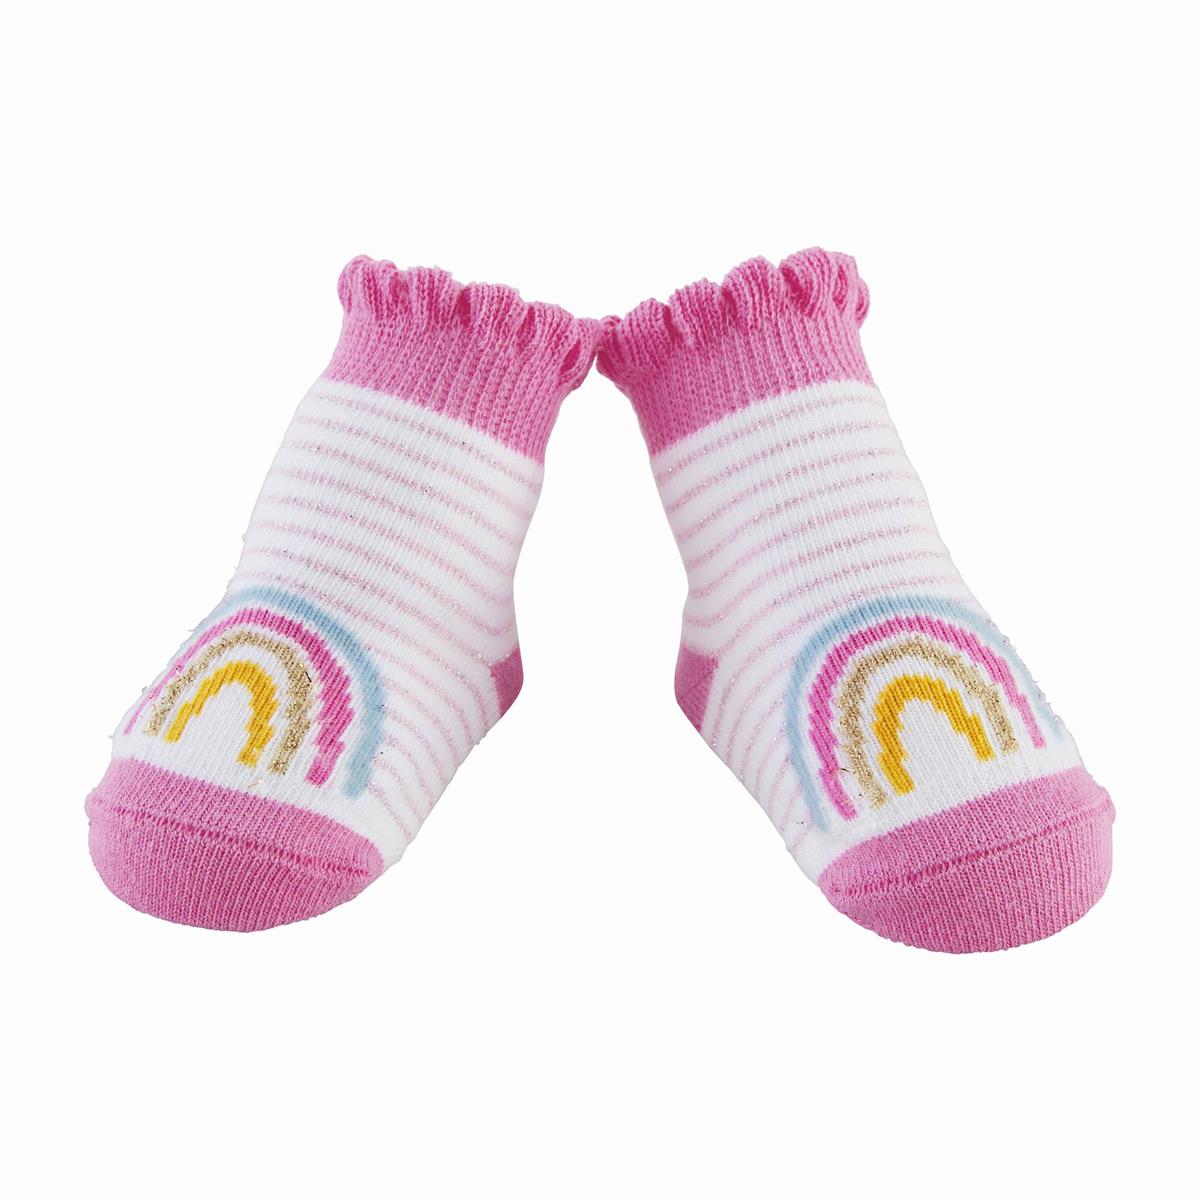 white socks with pink toes and ruffled rim with rainbows on the top of the foot.